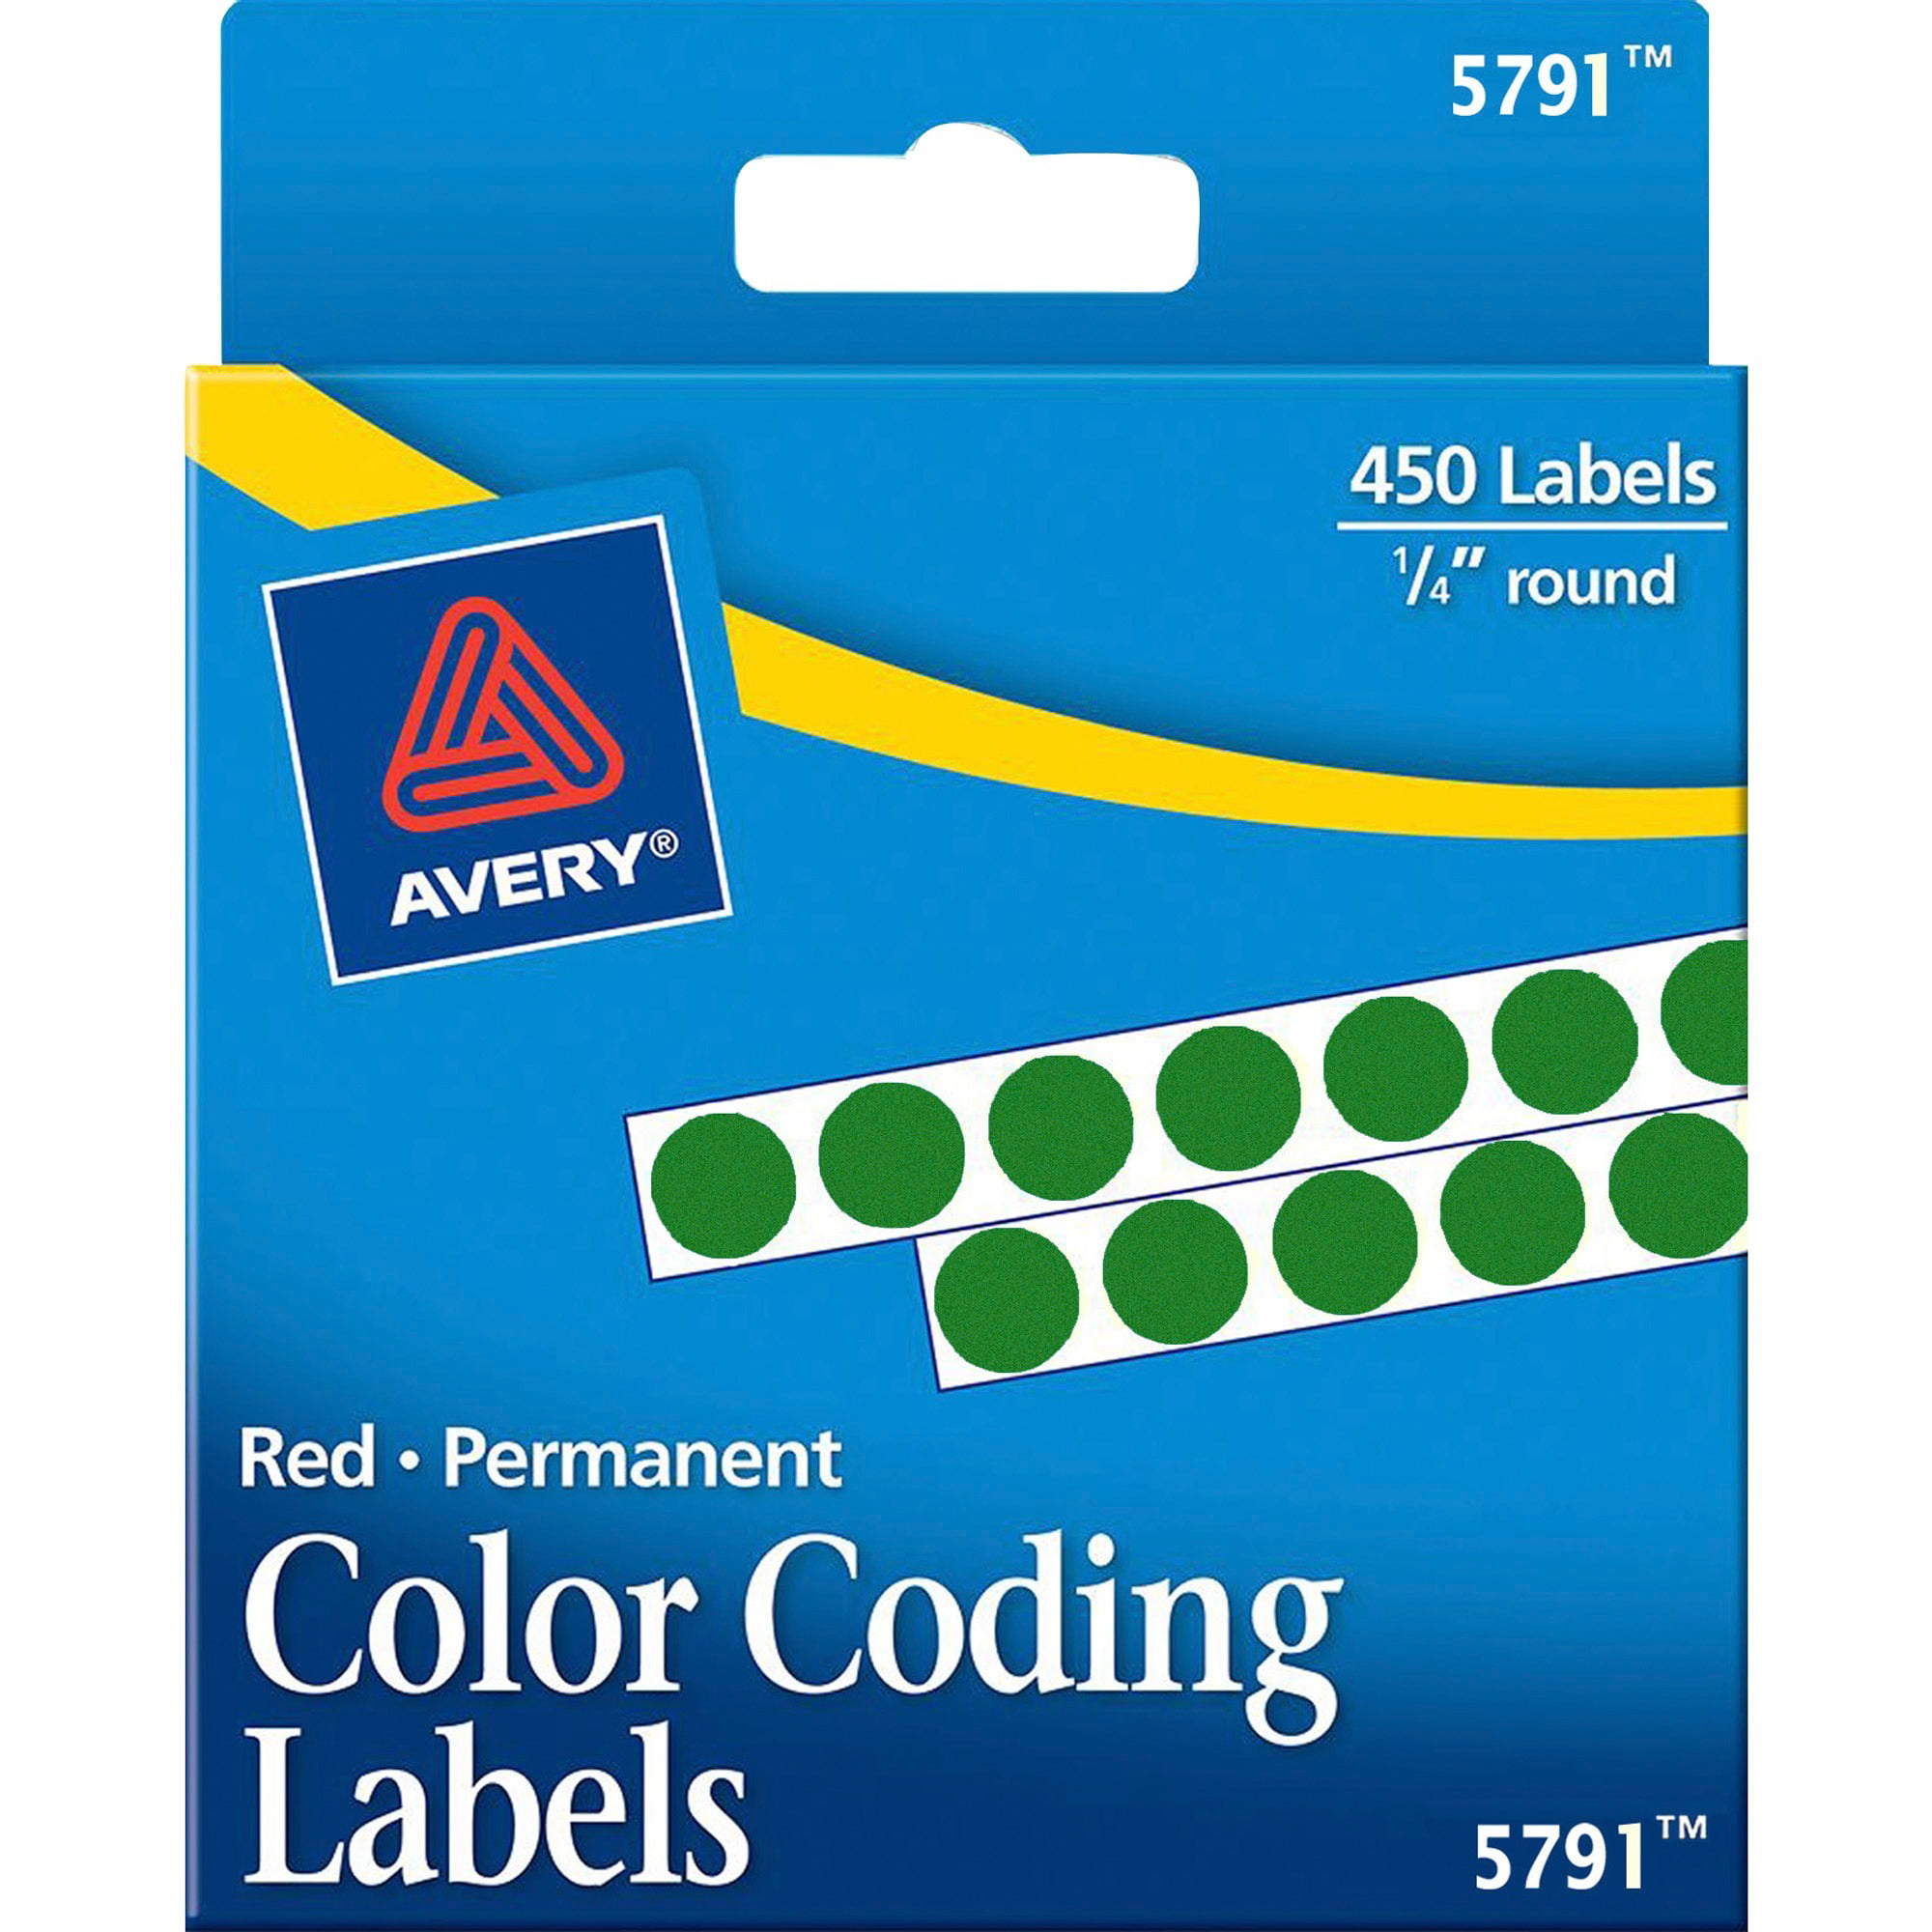 Permanent Adhesive - 1,000 Labels per Dispenser Box 0.25 in 1/4 Pink Color-Coding Dot Stickers